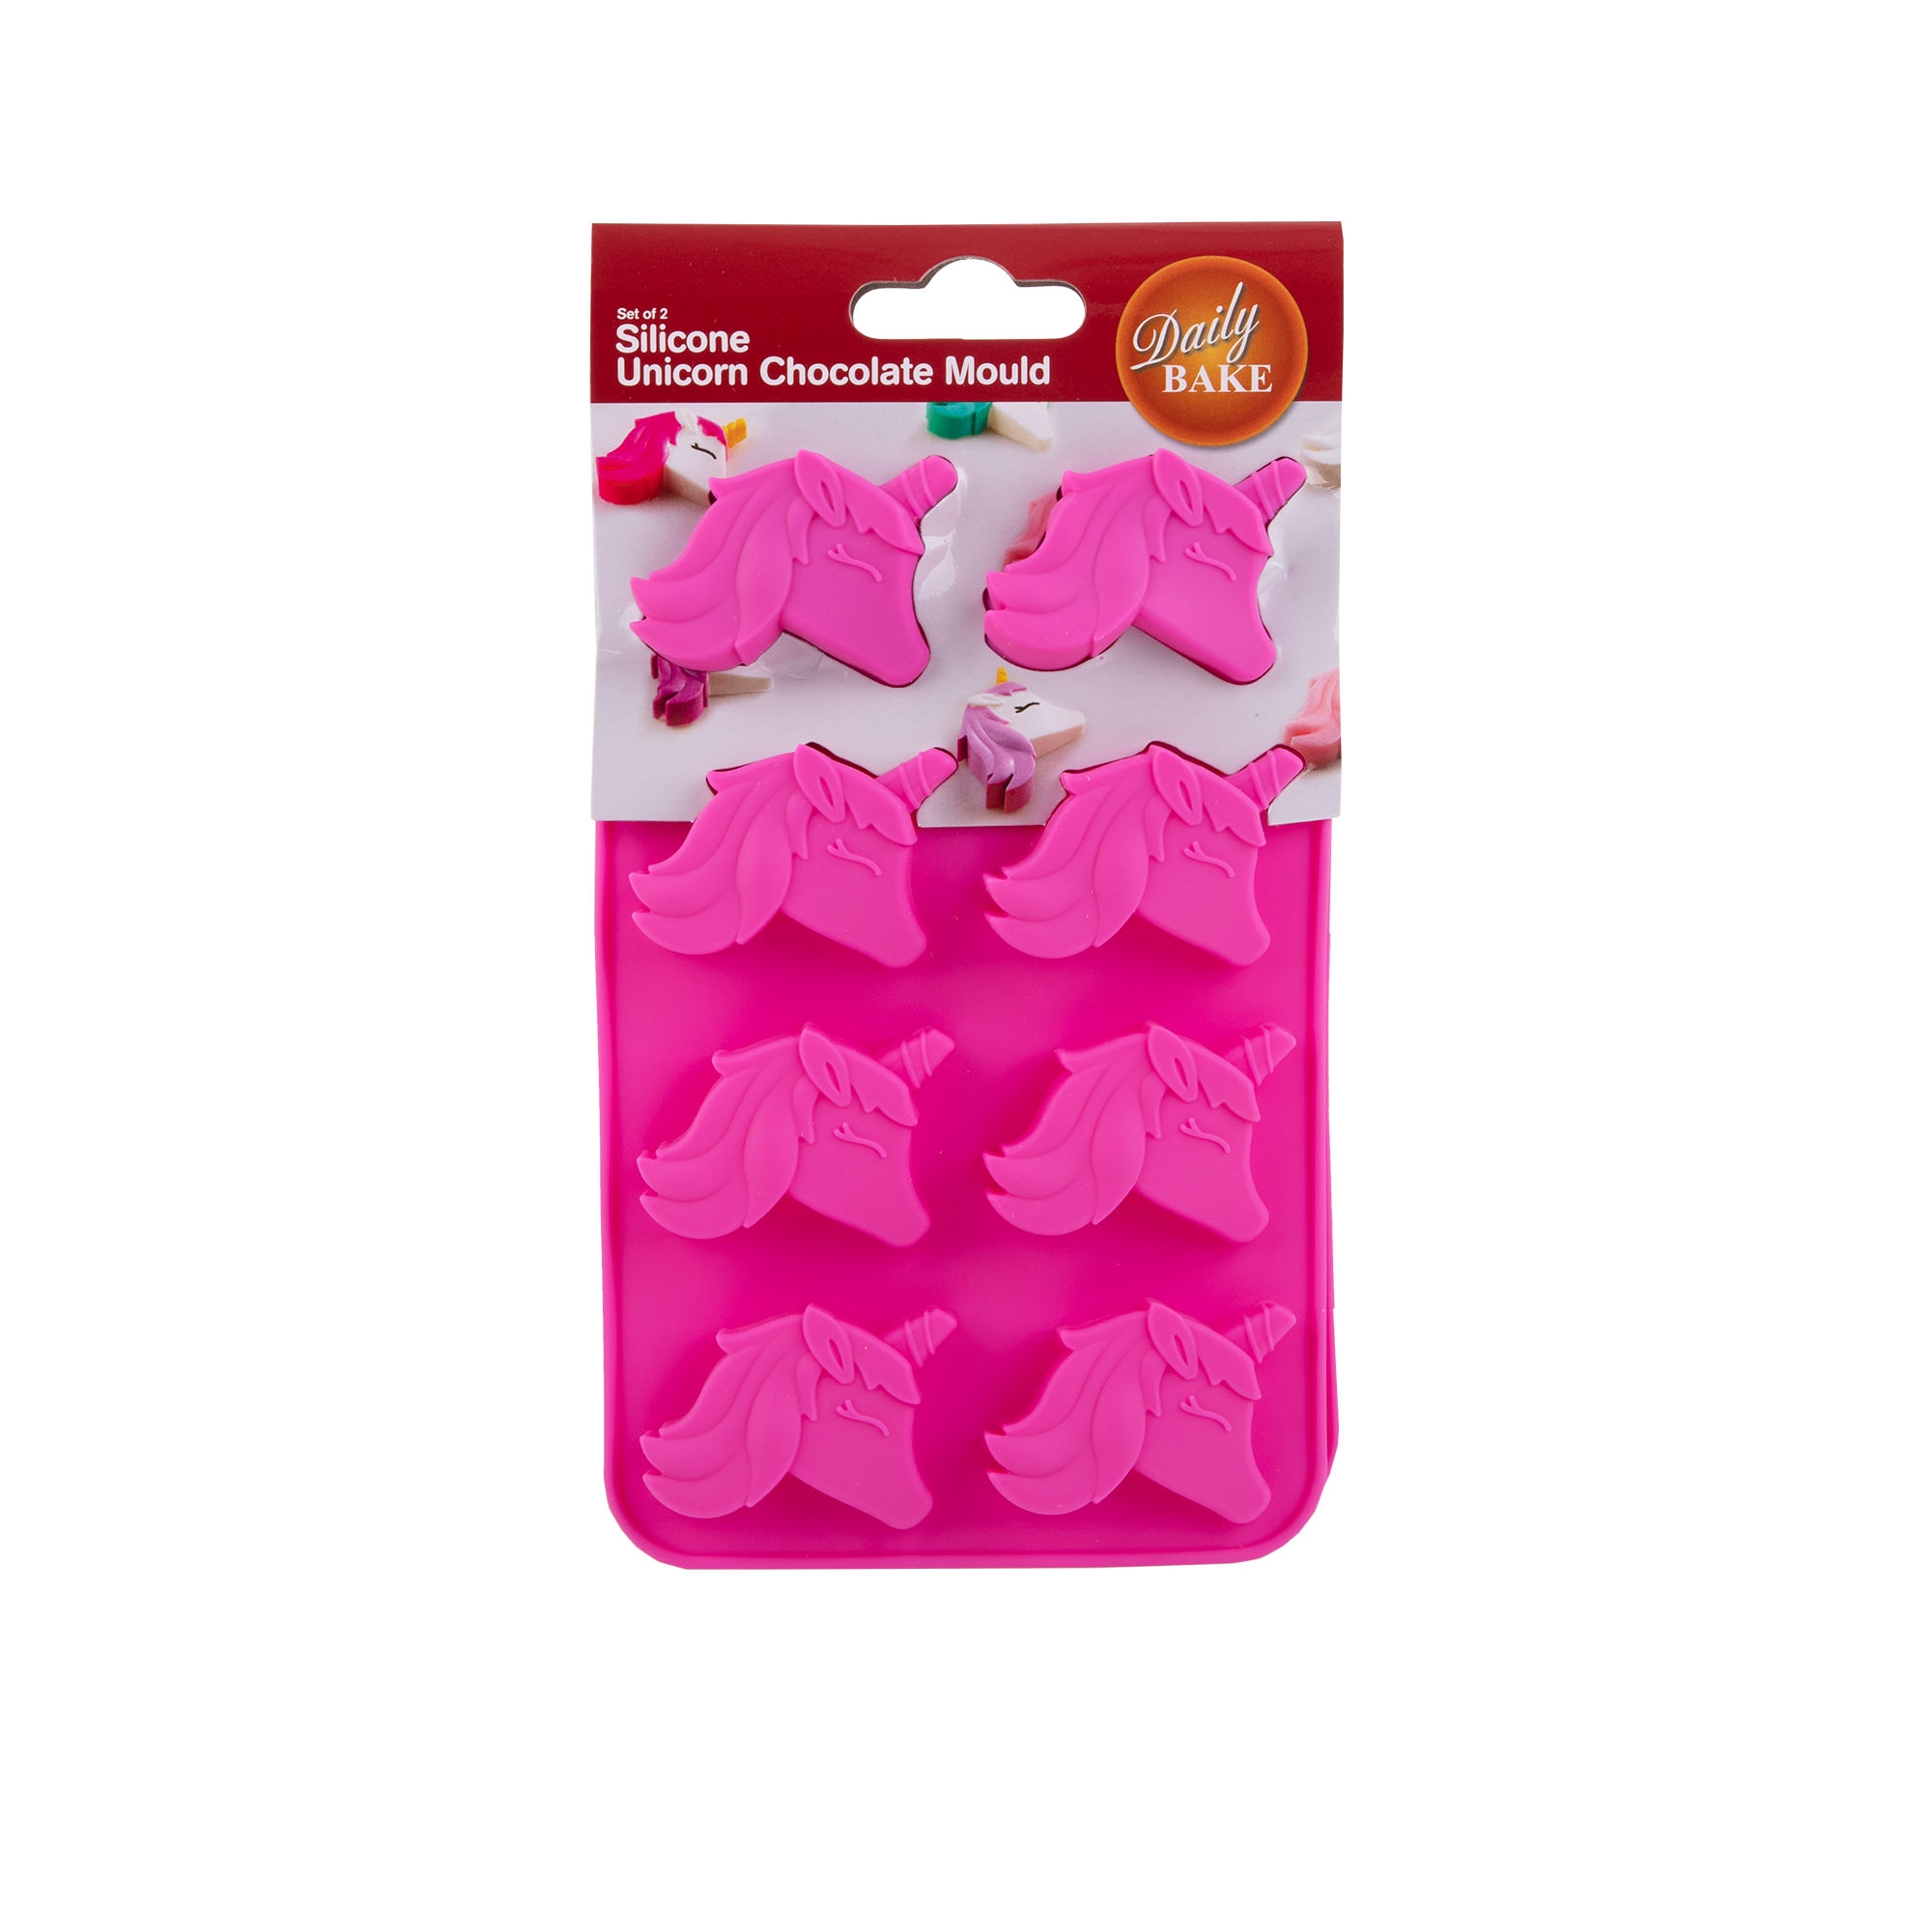 Daily Bake Unicorn Chocolate Mould 8 Cup Set of 2 Pink Image 2